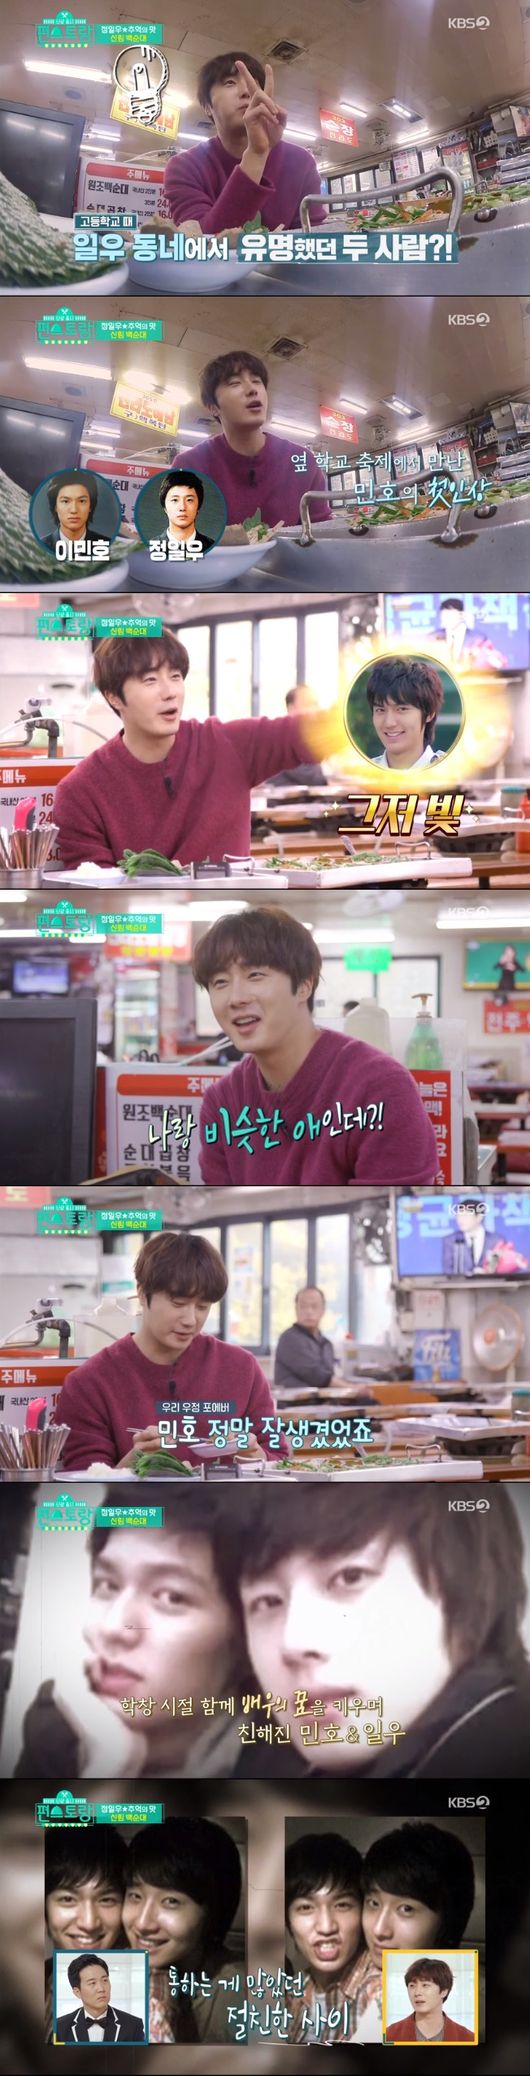 Stars Top Recipe at Fun-Staurant Jung Il-woo found a Sillim-dong Baeksundae house that he often ate with his girlfriend in high school.Jung Il-woo ordered the Sillim-dong Baeksundae to taste the memories of the theme on KBS Stars Top Recipe at Fun-Staurant broadcast on the afternoon of the 17th.The storm of the sun has begun to overshadow the words of Do not you have a lot of sheep?I did a lot of Date here, he said, who is it? And in high school, he replied.Jung Il-woo said, I first met Lee Min-ho in high school and I knew it was like a dream about acting and quickly became close.Lee Min-ho is the only celebrity friend who is now my best friend. Jung Il-woo laughed, I do not recognize handsome people. After eating Baek Soondae, his cousin, who is working for the market, headed to the anchovy shop where he took over the family business.My cousins brother, who kept eating for anchovy, said, It is 1,000 won per one. I have to buy.I bought anchovies and put anchovies in the rice bowl instead of a snail, boiled a strong miso, and then changed pine nuts and peanuts, and Lee Jung-hyun praised his idea, saying that he would sue too much.I boiled auk, modern and cabbage, put anchovy sauce, wrapped it in a wrap, and packed a lunch box for someone.Ilwoo said that he had packed lunch for the first time in his life, and he was headed for a theater in Daehangno with such cheap rice.While the boom was so proposal that I should marry, Iwoo entered Lee Soon-jaes practice room while supporting Ilwoos love.Lee Soon-jae looked at Ilwoo and asked, What is that in your head? And Ilwoos head had a headband saying, I love you, Sunjae Sam.Two people who had a relationship with high kicks 13 years ago, Ilwoo framed a high kick photo taken from the photo studio and told Lee Soon-jae.Stars Top Recipe at Fun-Staurant You know? Its a program Im doing these days.Lee Soon-jae asked if he was going to turn into a business and laughed, Lets put some in there.Lee Soon-jae said, It tastes good? while eating a lunch box of Ilwoo, and Ilwoo was in color.KBS Stars Top Recipe at Fun-Staurant Broadcast Screen Capture